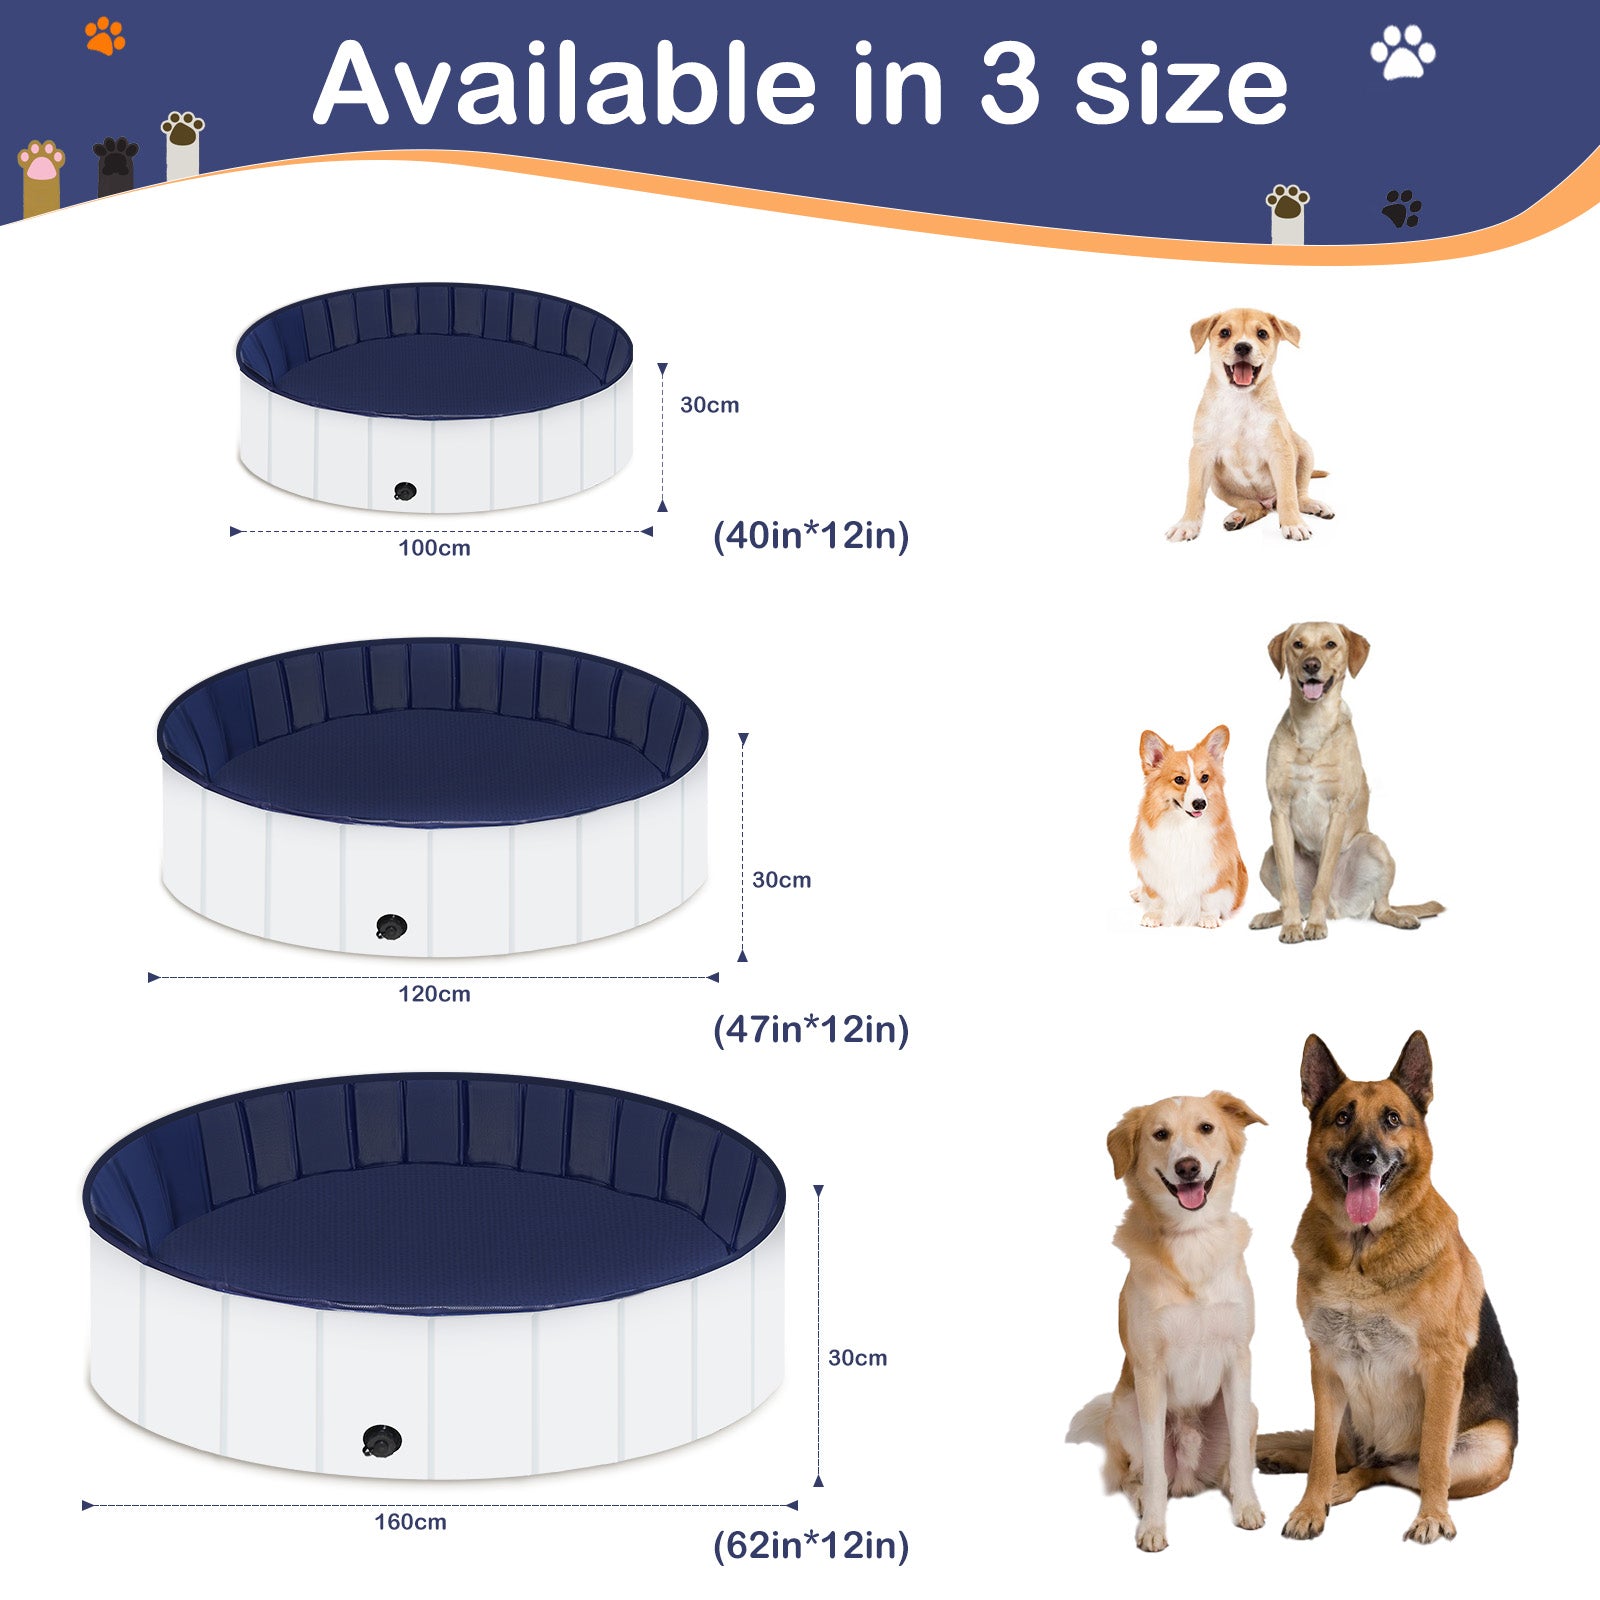 Foldable Dog Pool, Portable Hard Plastic Pet Pool For Dogs And Cats, Sturdy And Durable Pet Wading Pool For Indoor And Outdoor